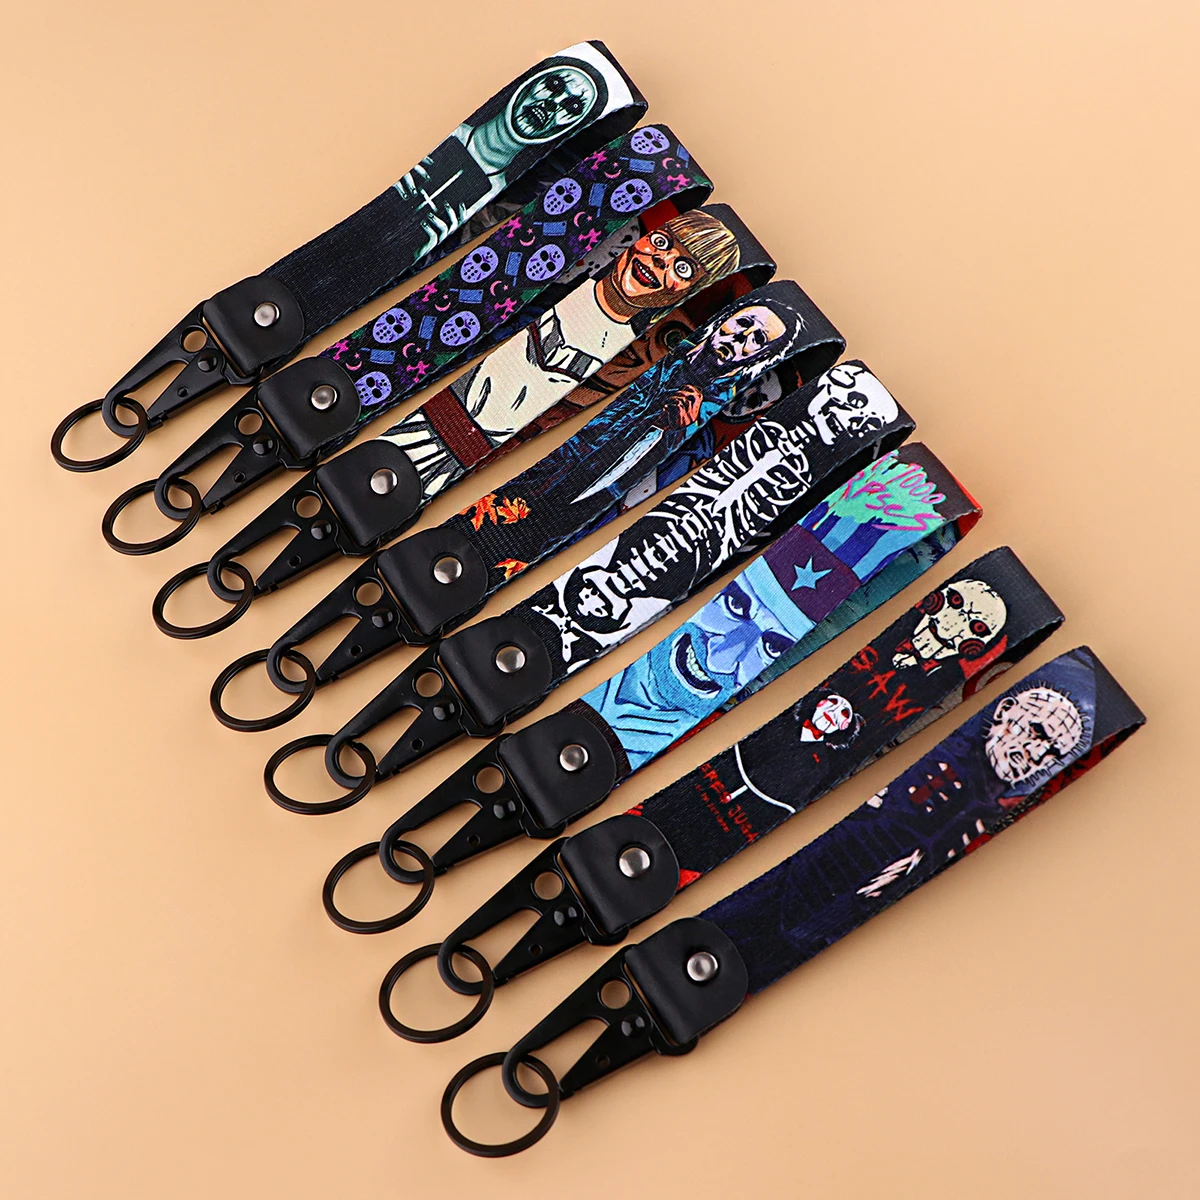 Horror Movie Short Rope Wrist Strap Lanyard for Phone Tag Keychain Key Ring Holder Halloween Accessories